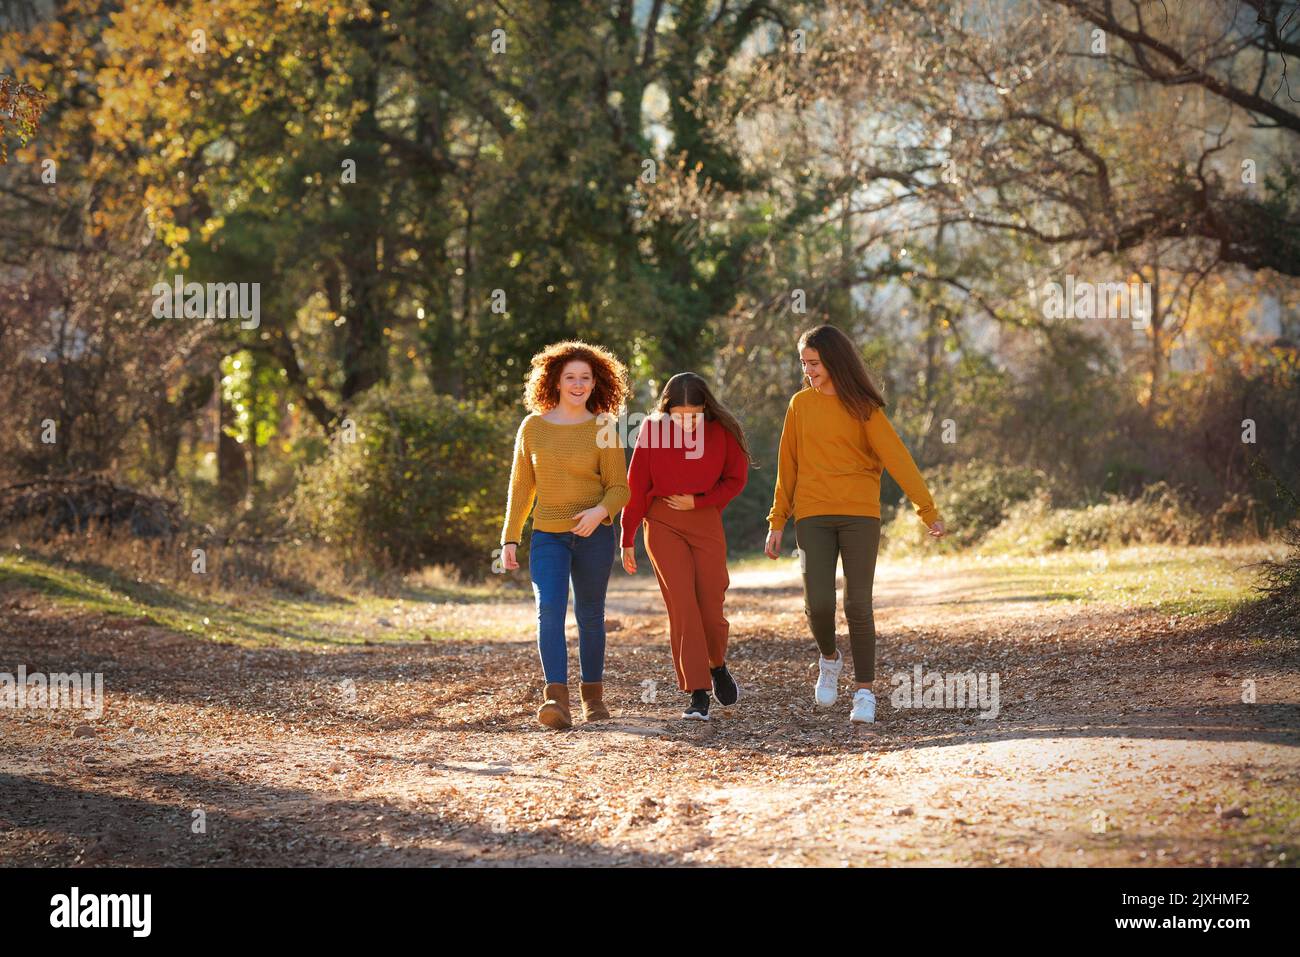 Group of teenage girls walking the streets and laughing. Stock Photo